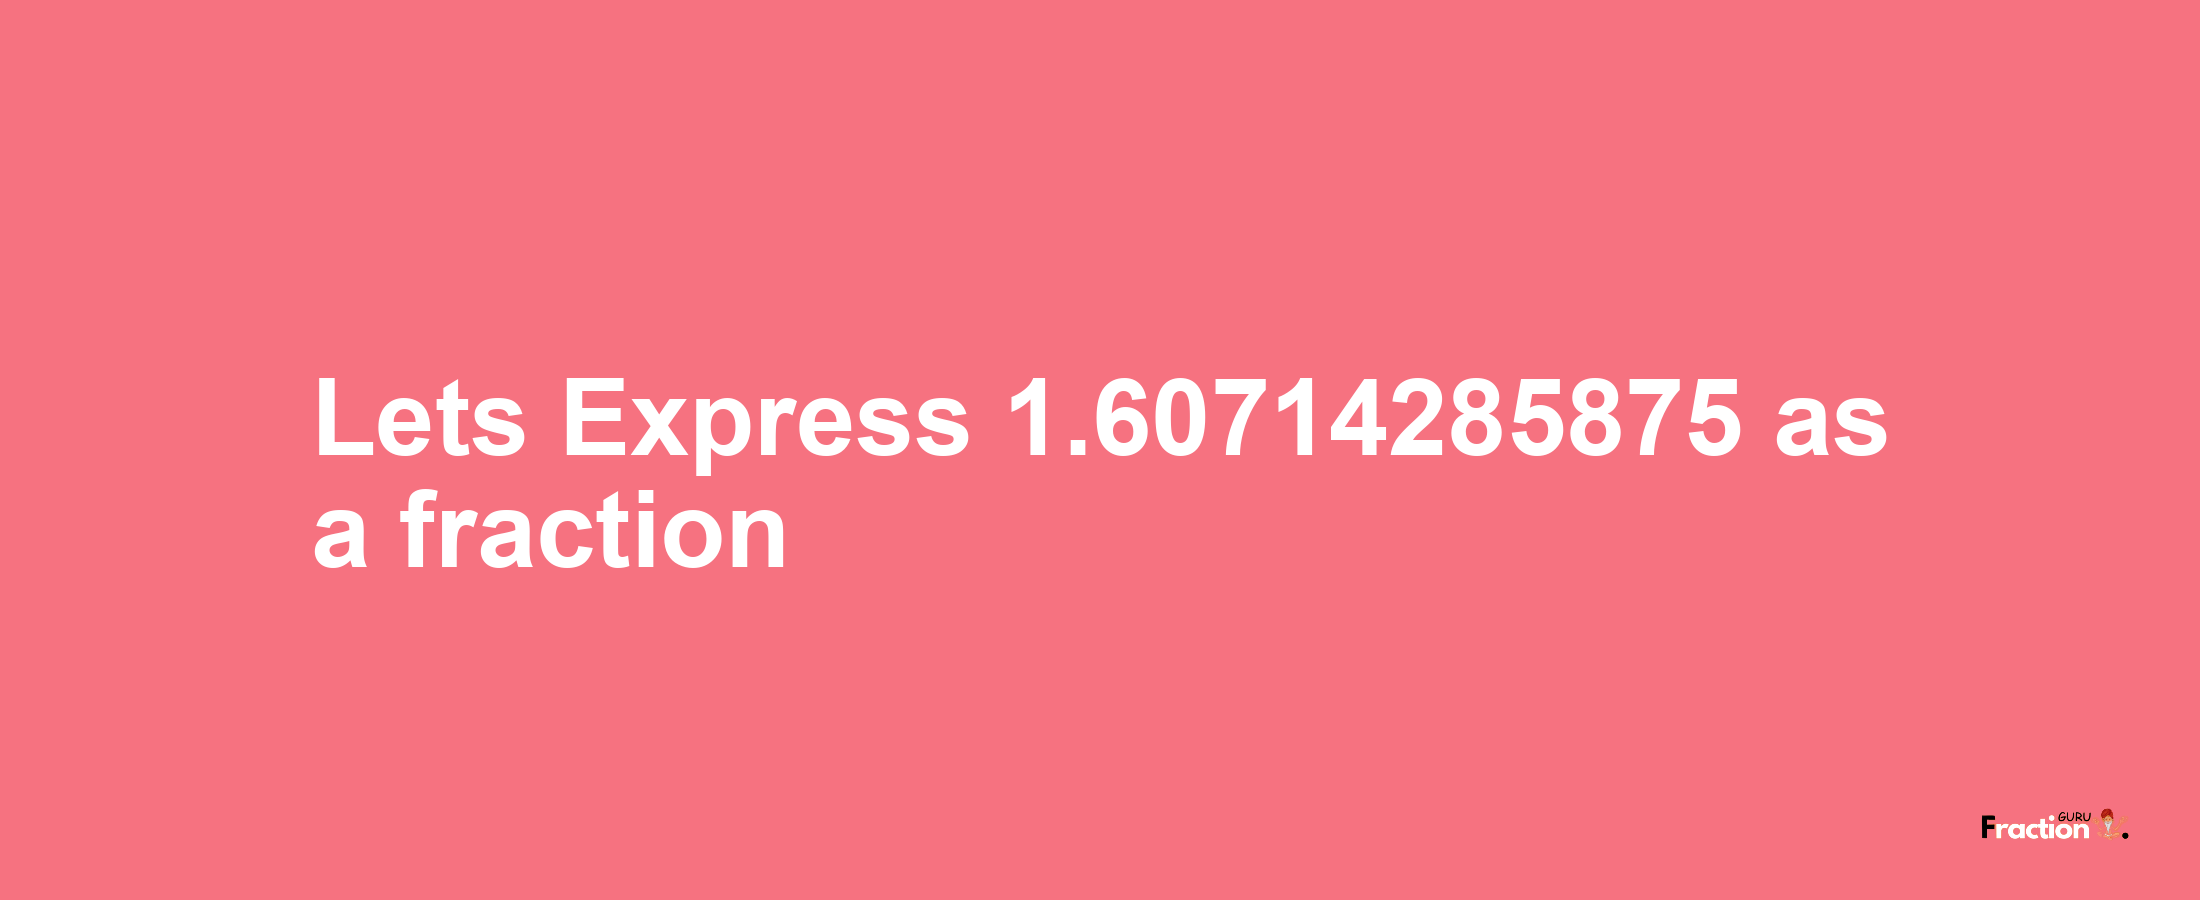 Lets Express 1.60714285875 as afraction